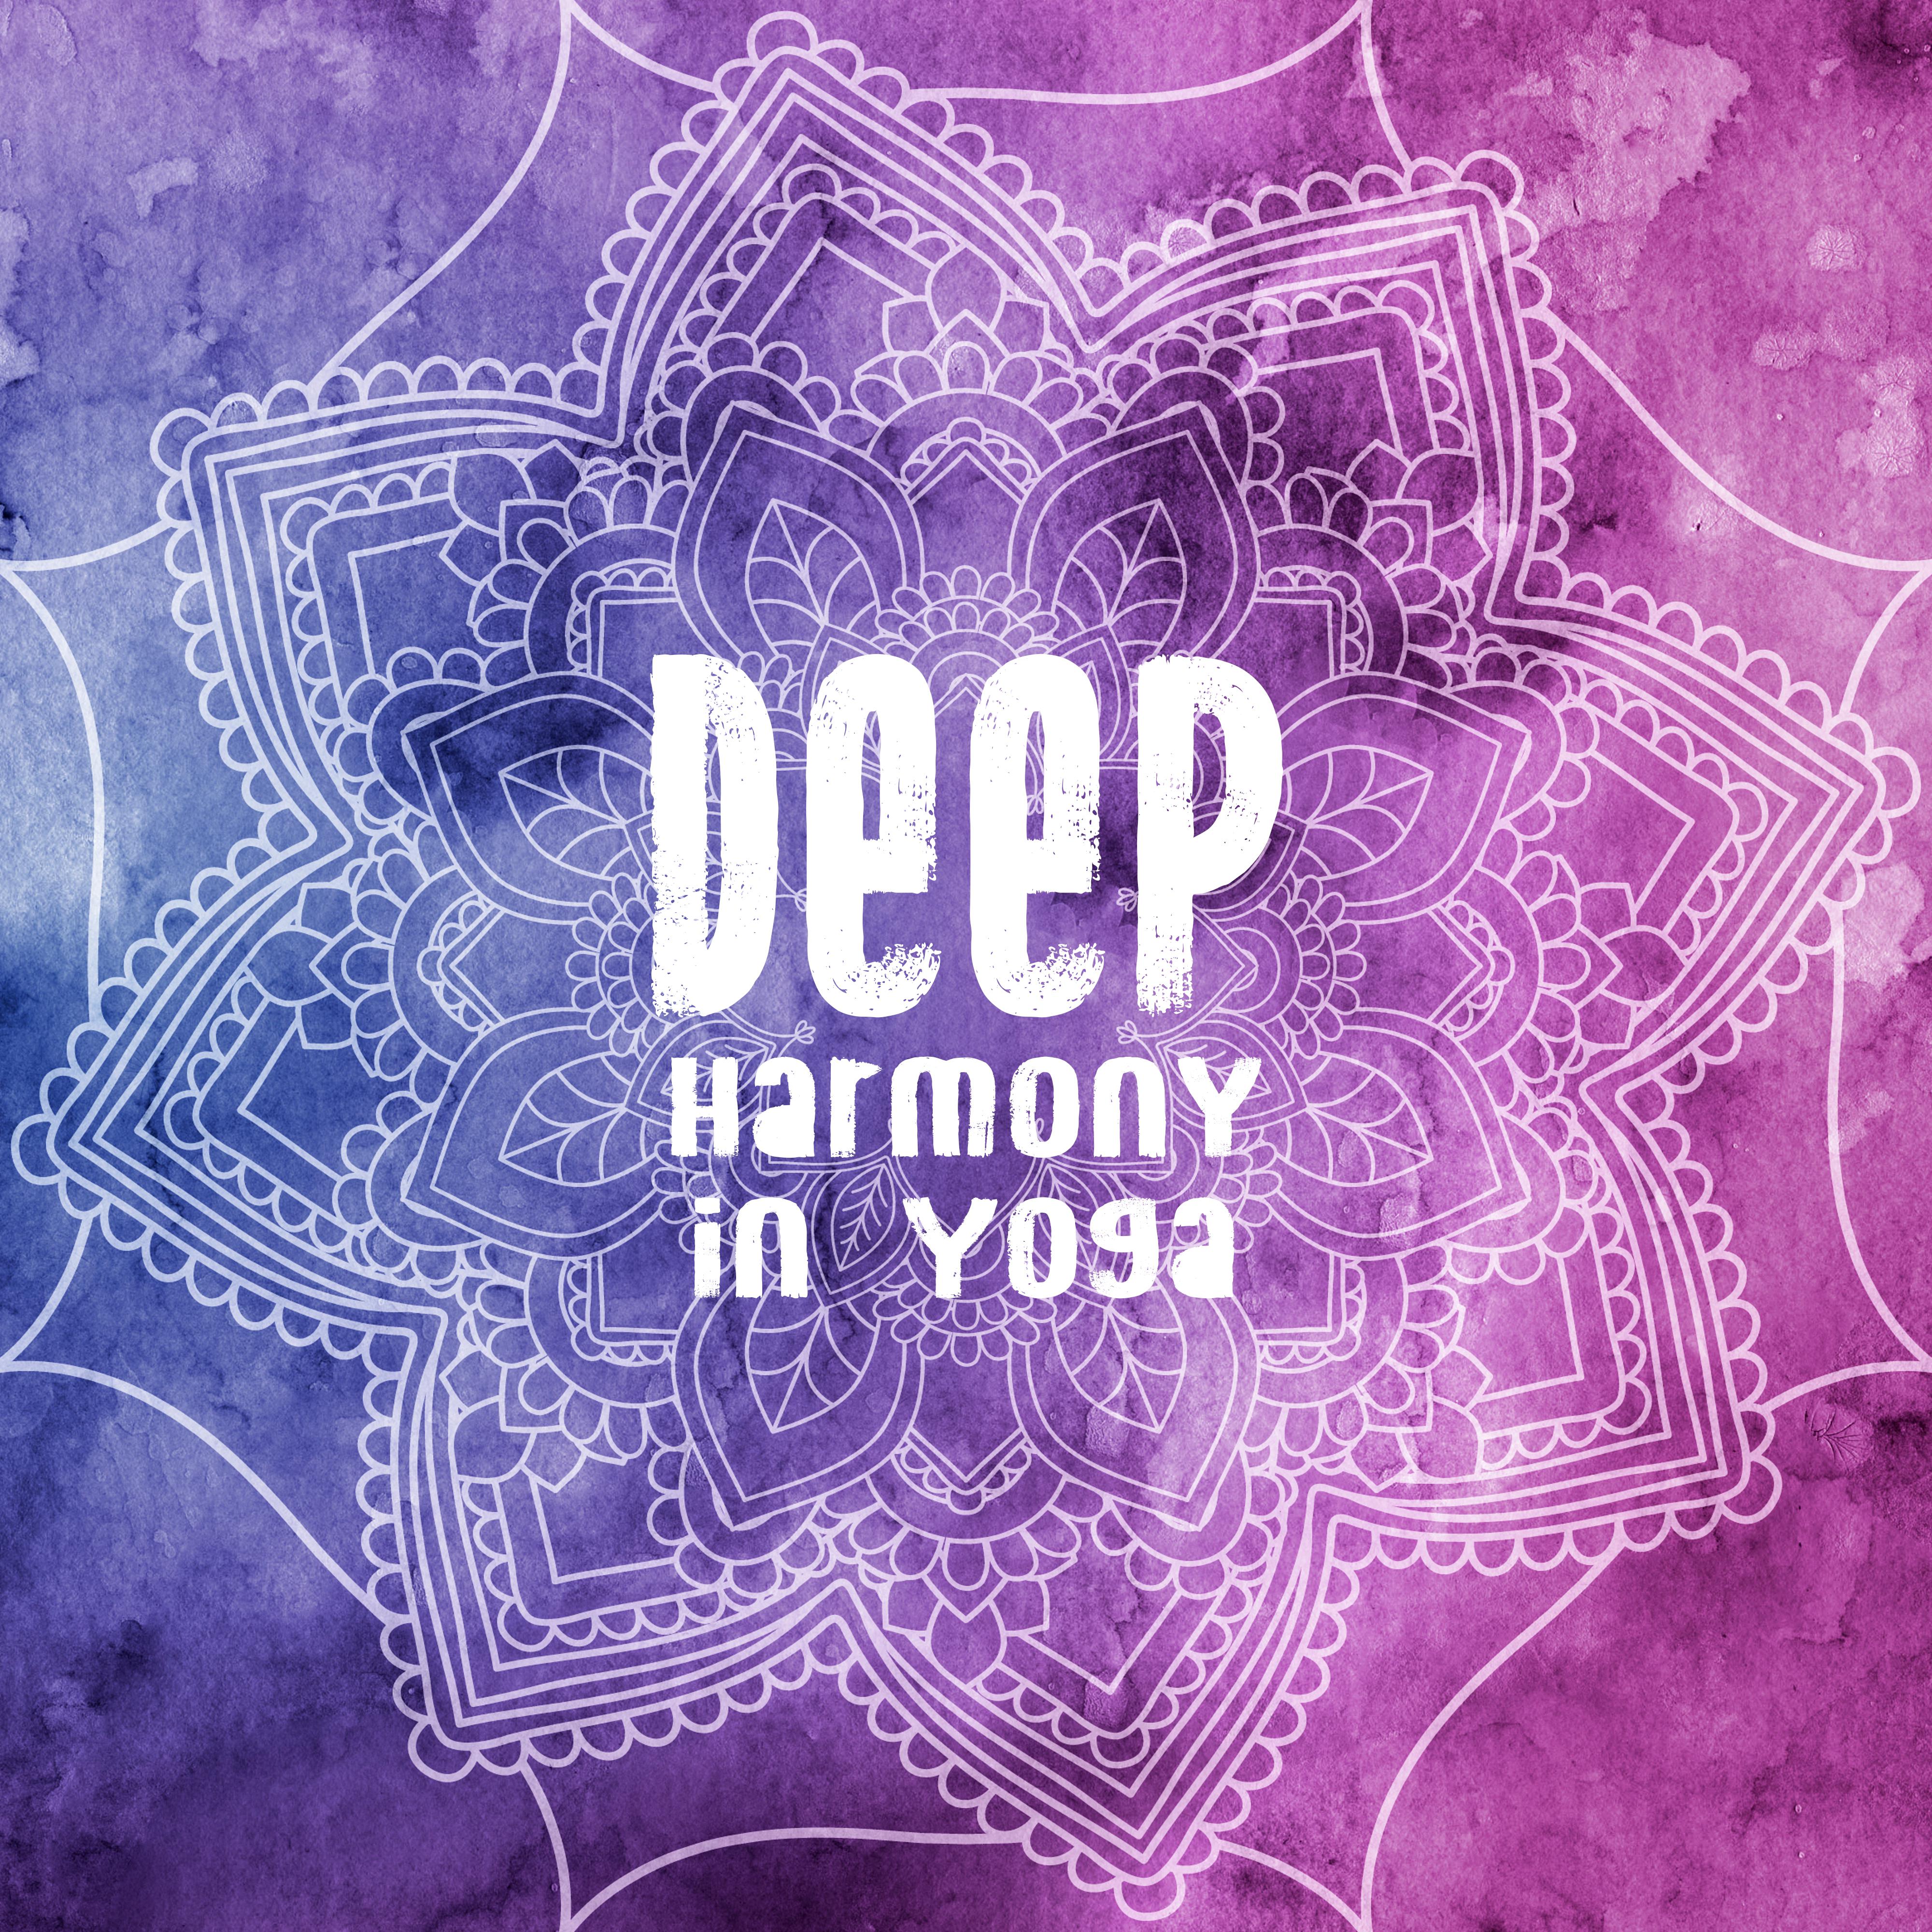 Deep Harmony in Yoga: Meditation Music Zone, Inner Focus, Stress Relief, Music for Mind, Relaxing Yoga, Spiritual Music to Rest